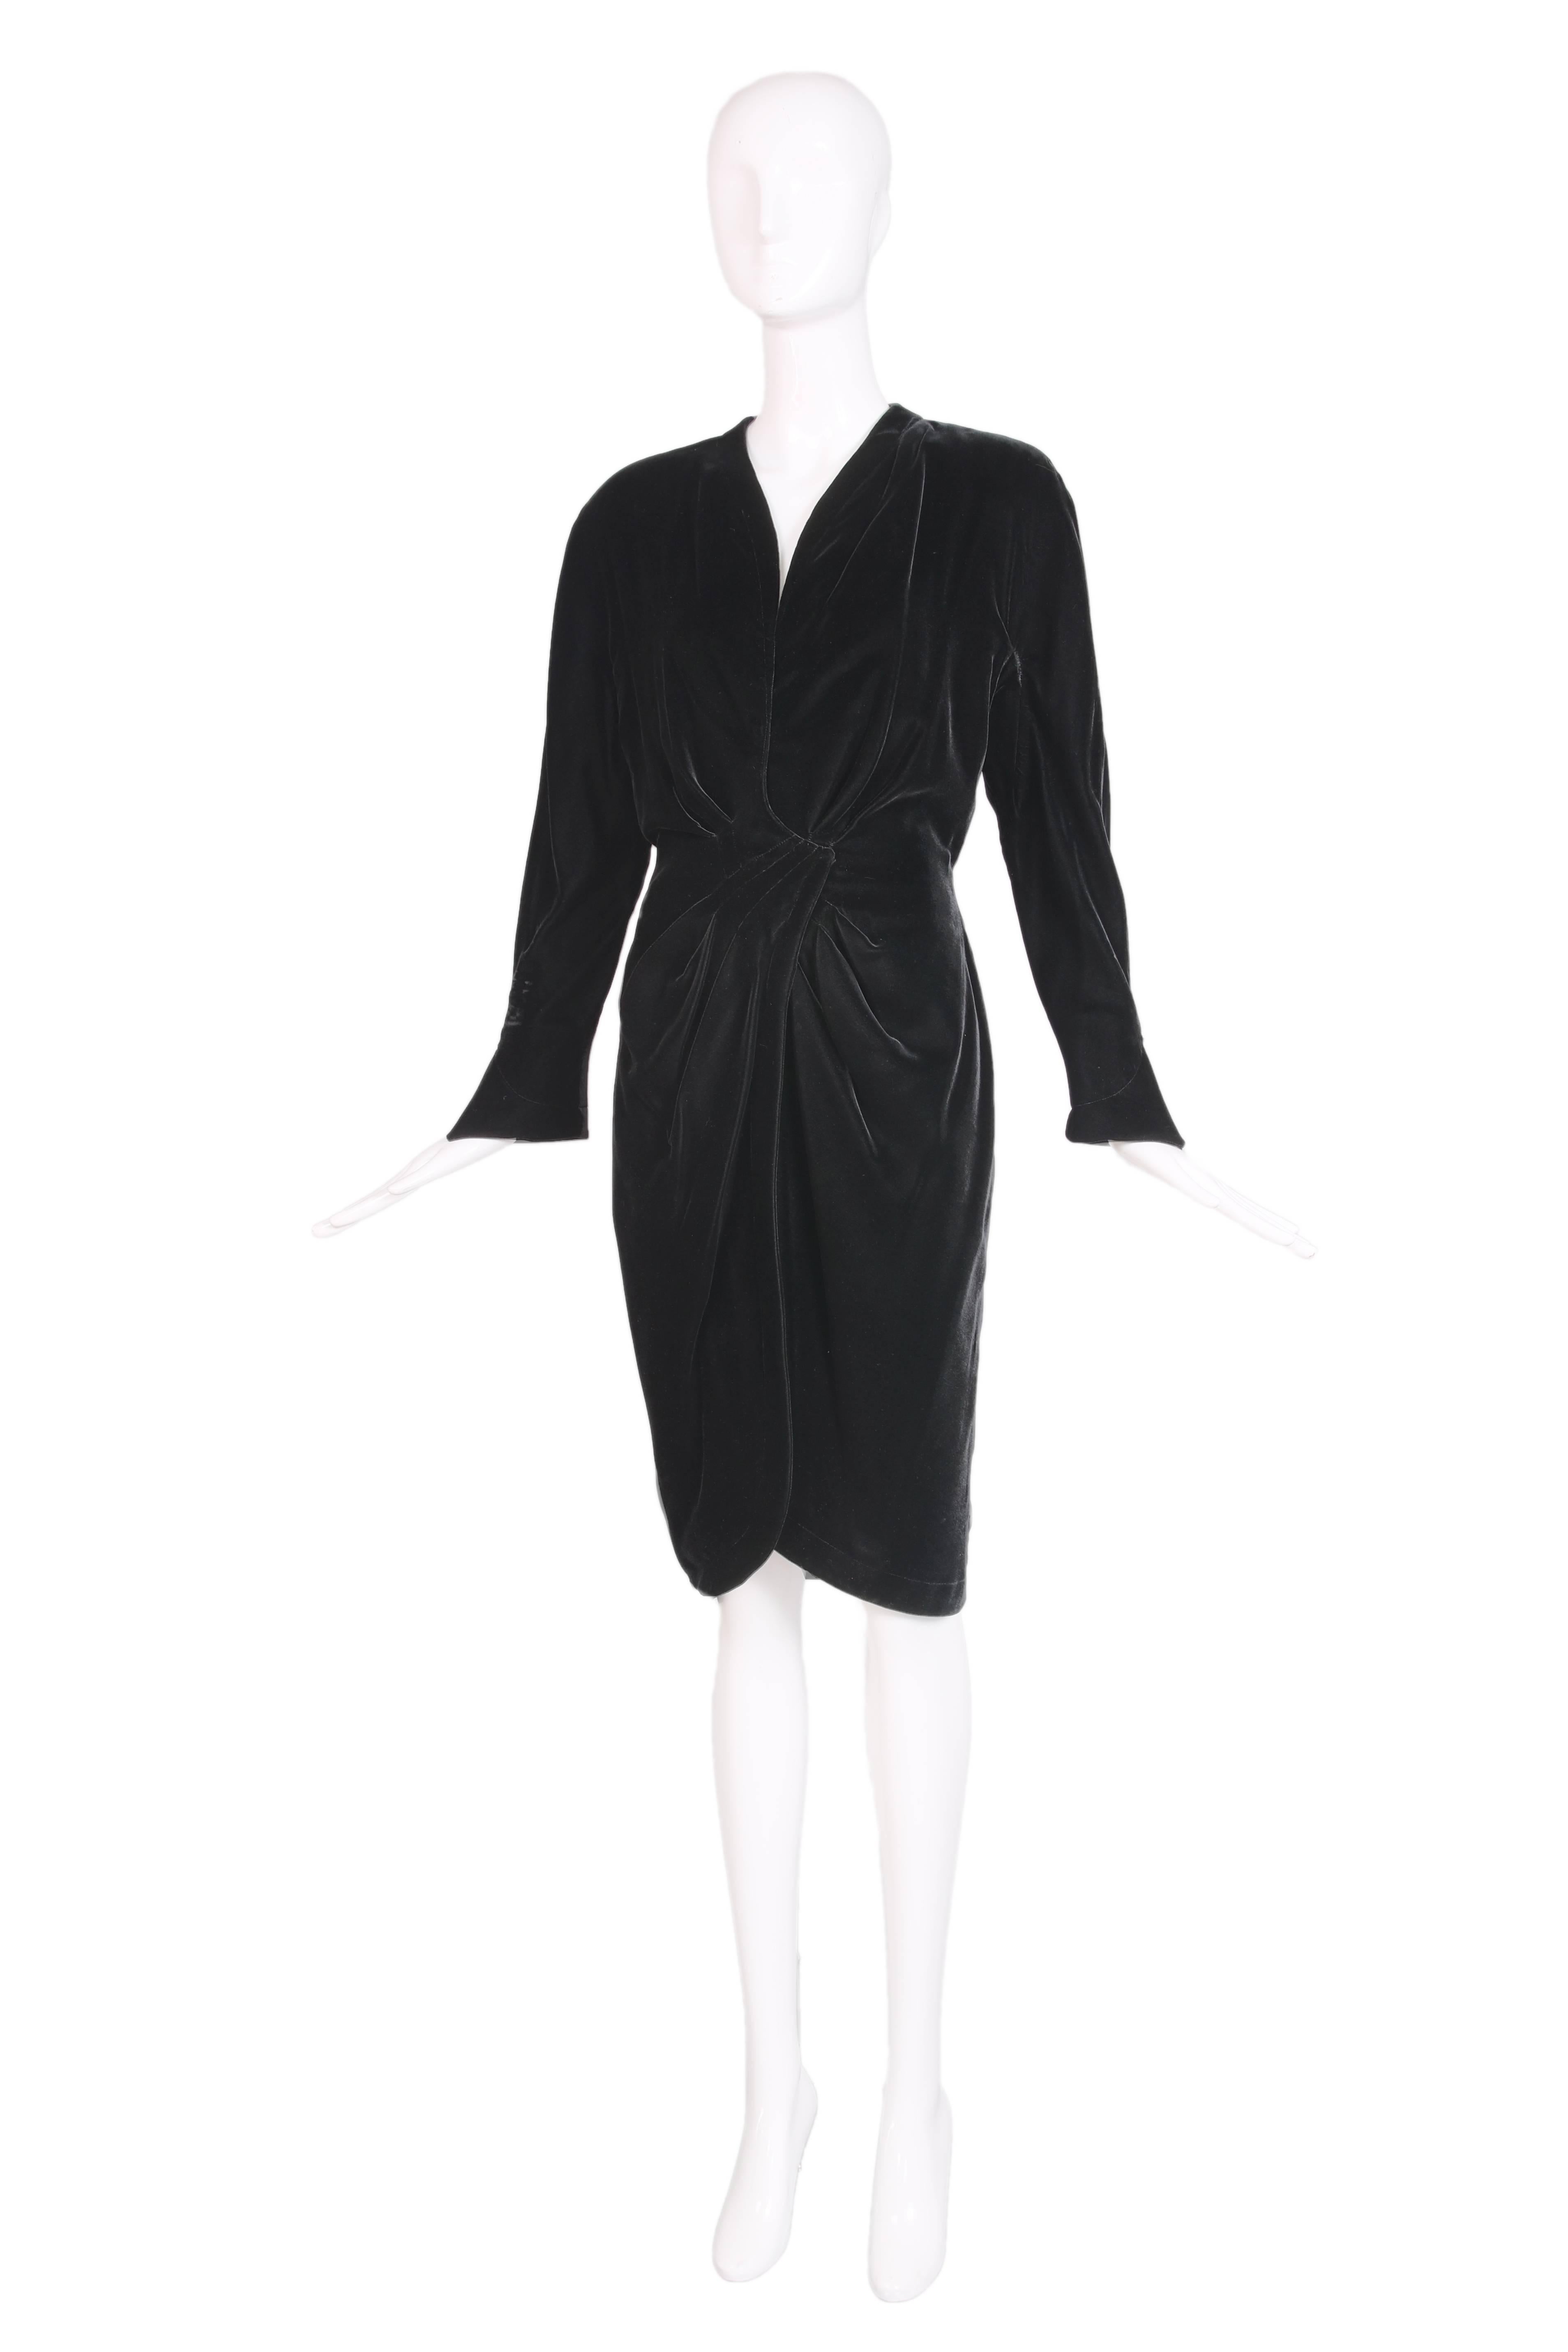 1990's Thierry Mugler black velvet wrap dress with hook and eye closure. Soft ruched detailing at the waist and hip that emphasizes Mugler's classic hourglass shape. Slight flare at the sleeves with a slit. In excellent condition with about an inch